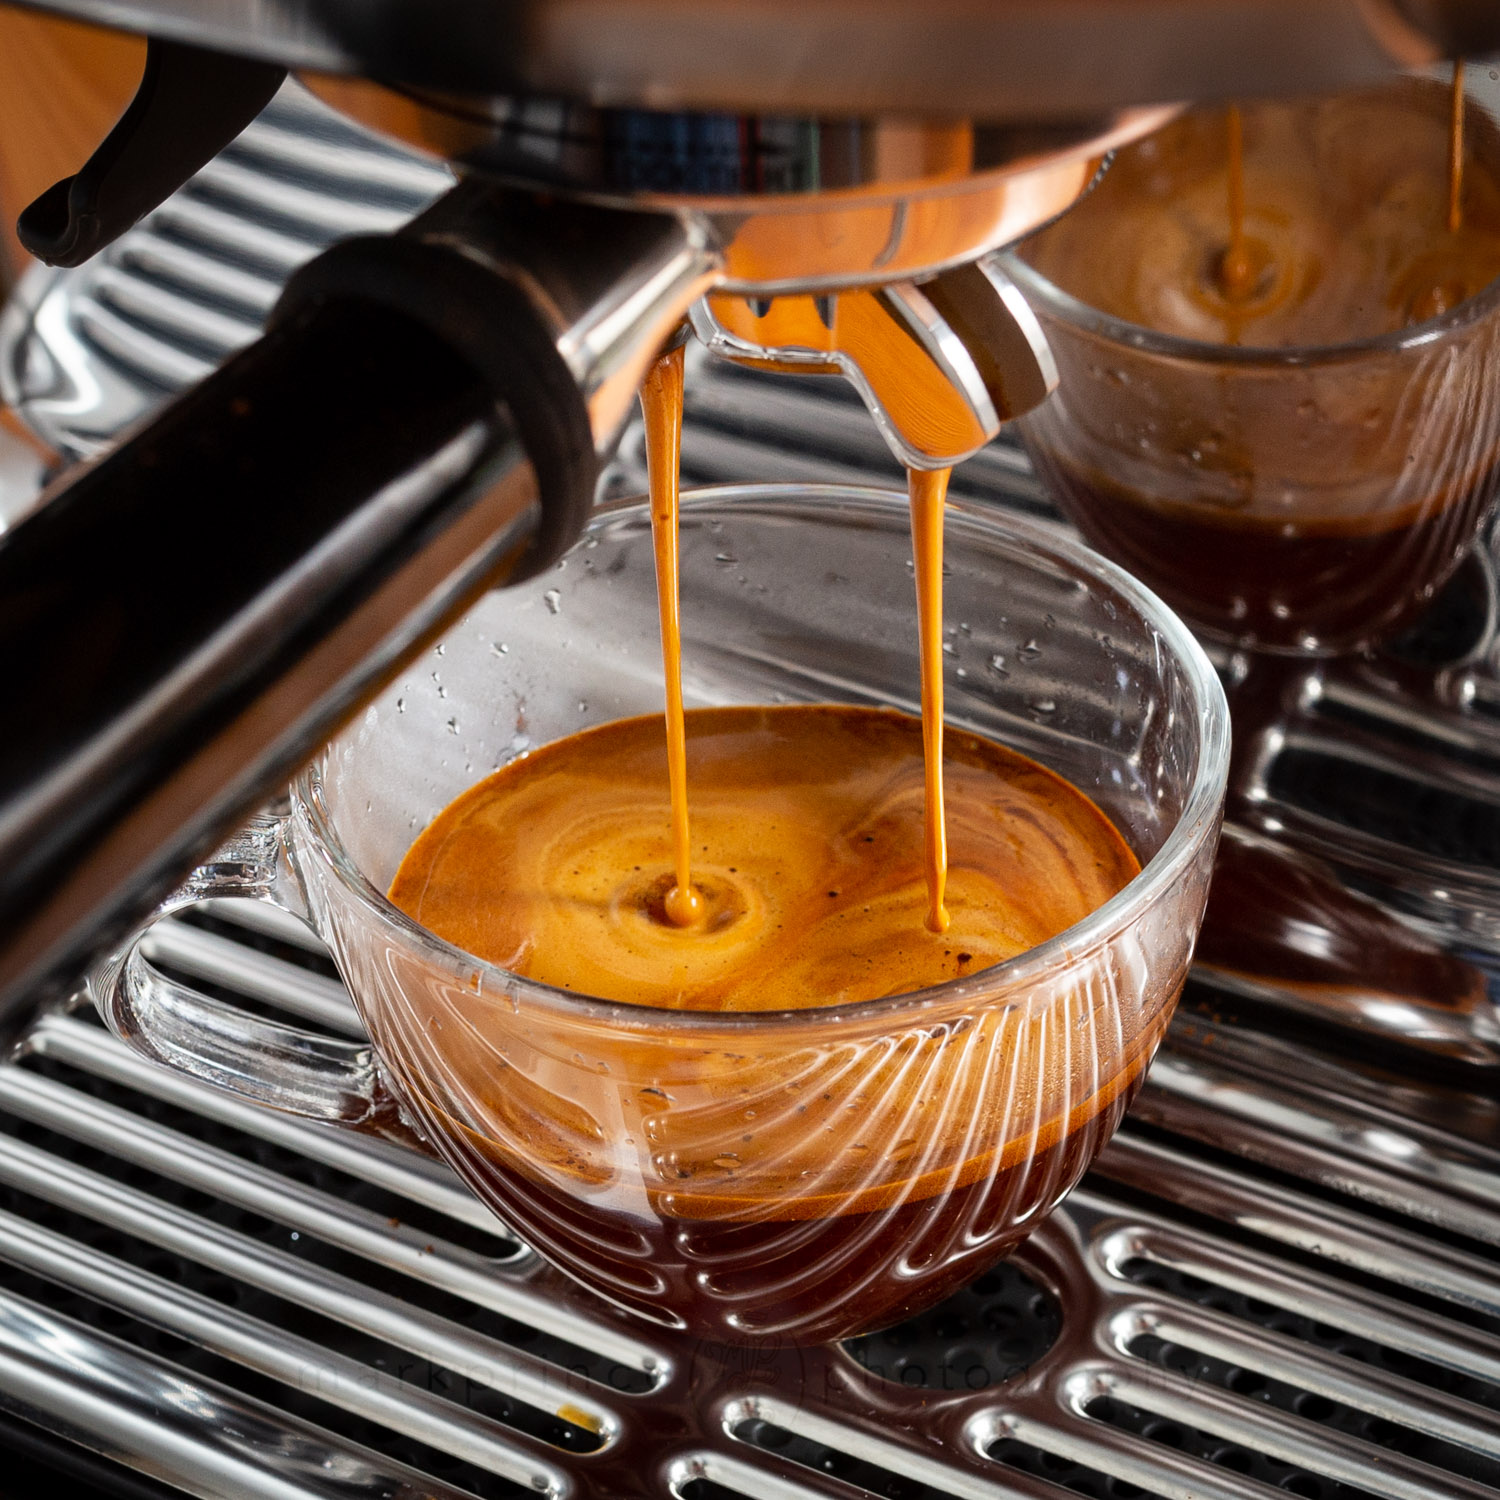 How To Make Americano - The Expert's Guide to Making Americano Coffee